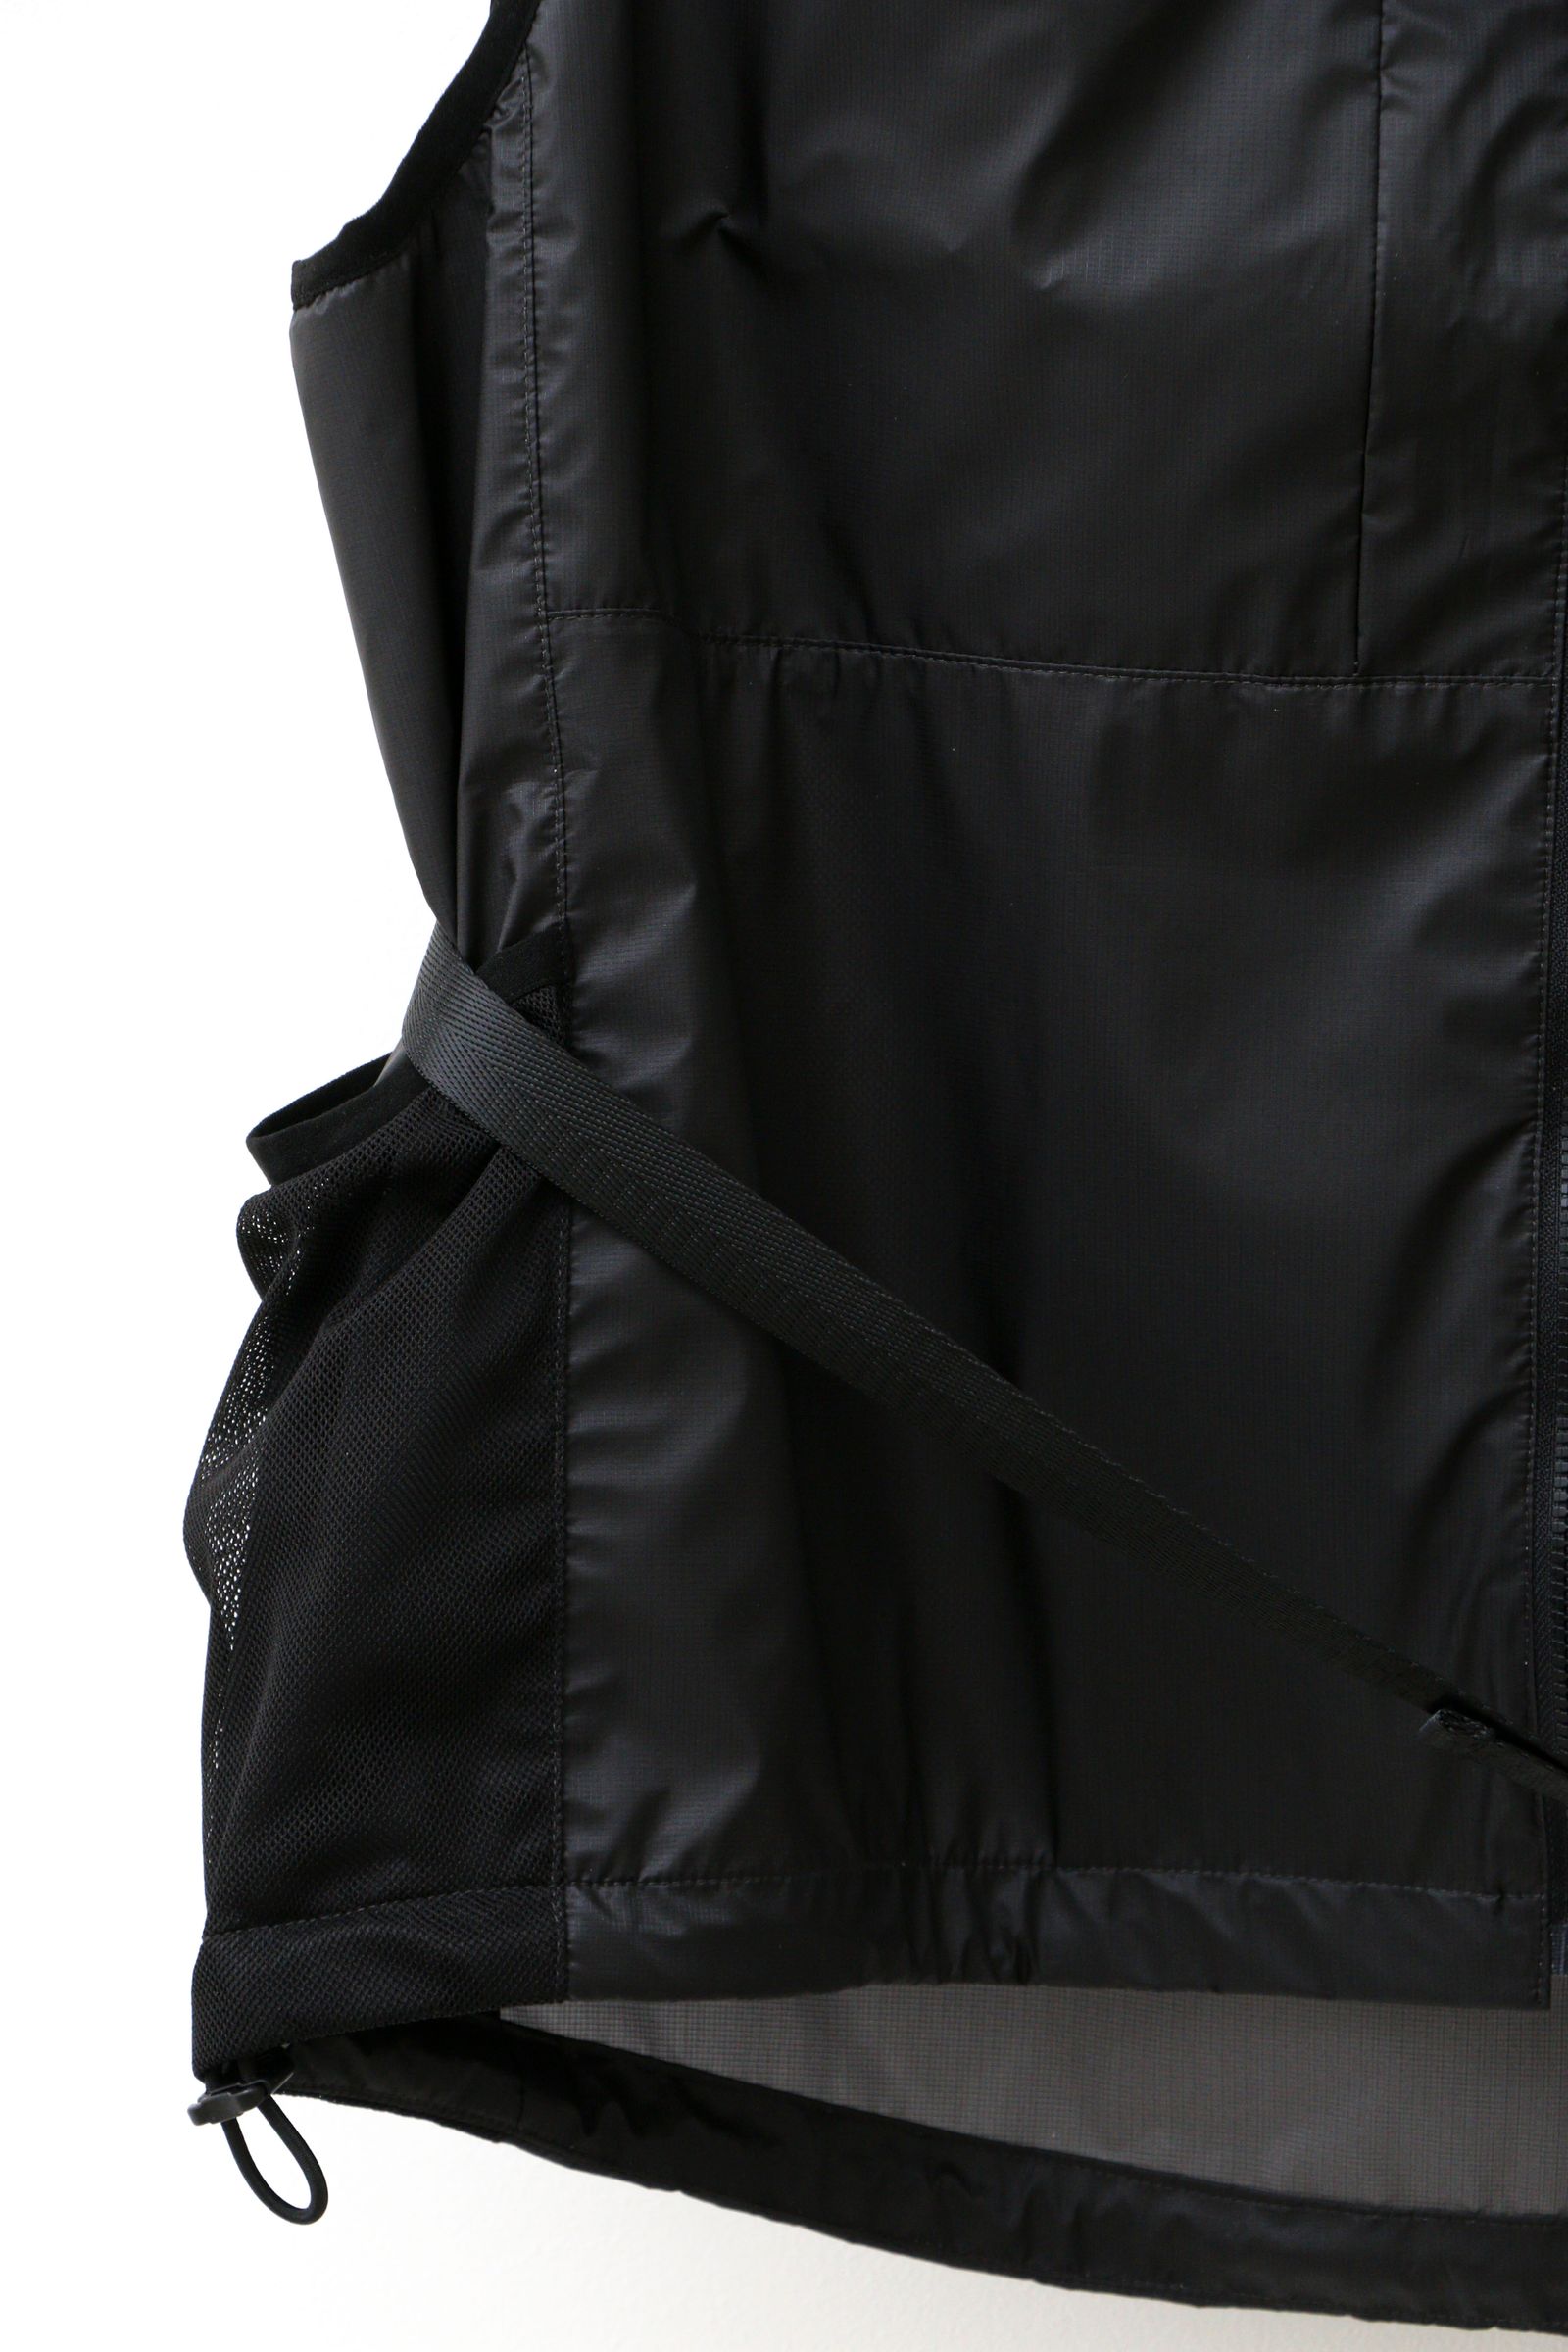 bal - STEALTH POCKET PANEL VEST IDEA FROM GEEK OUT STORE Charcoal 